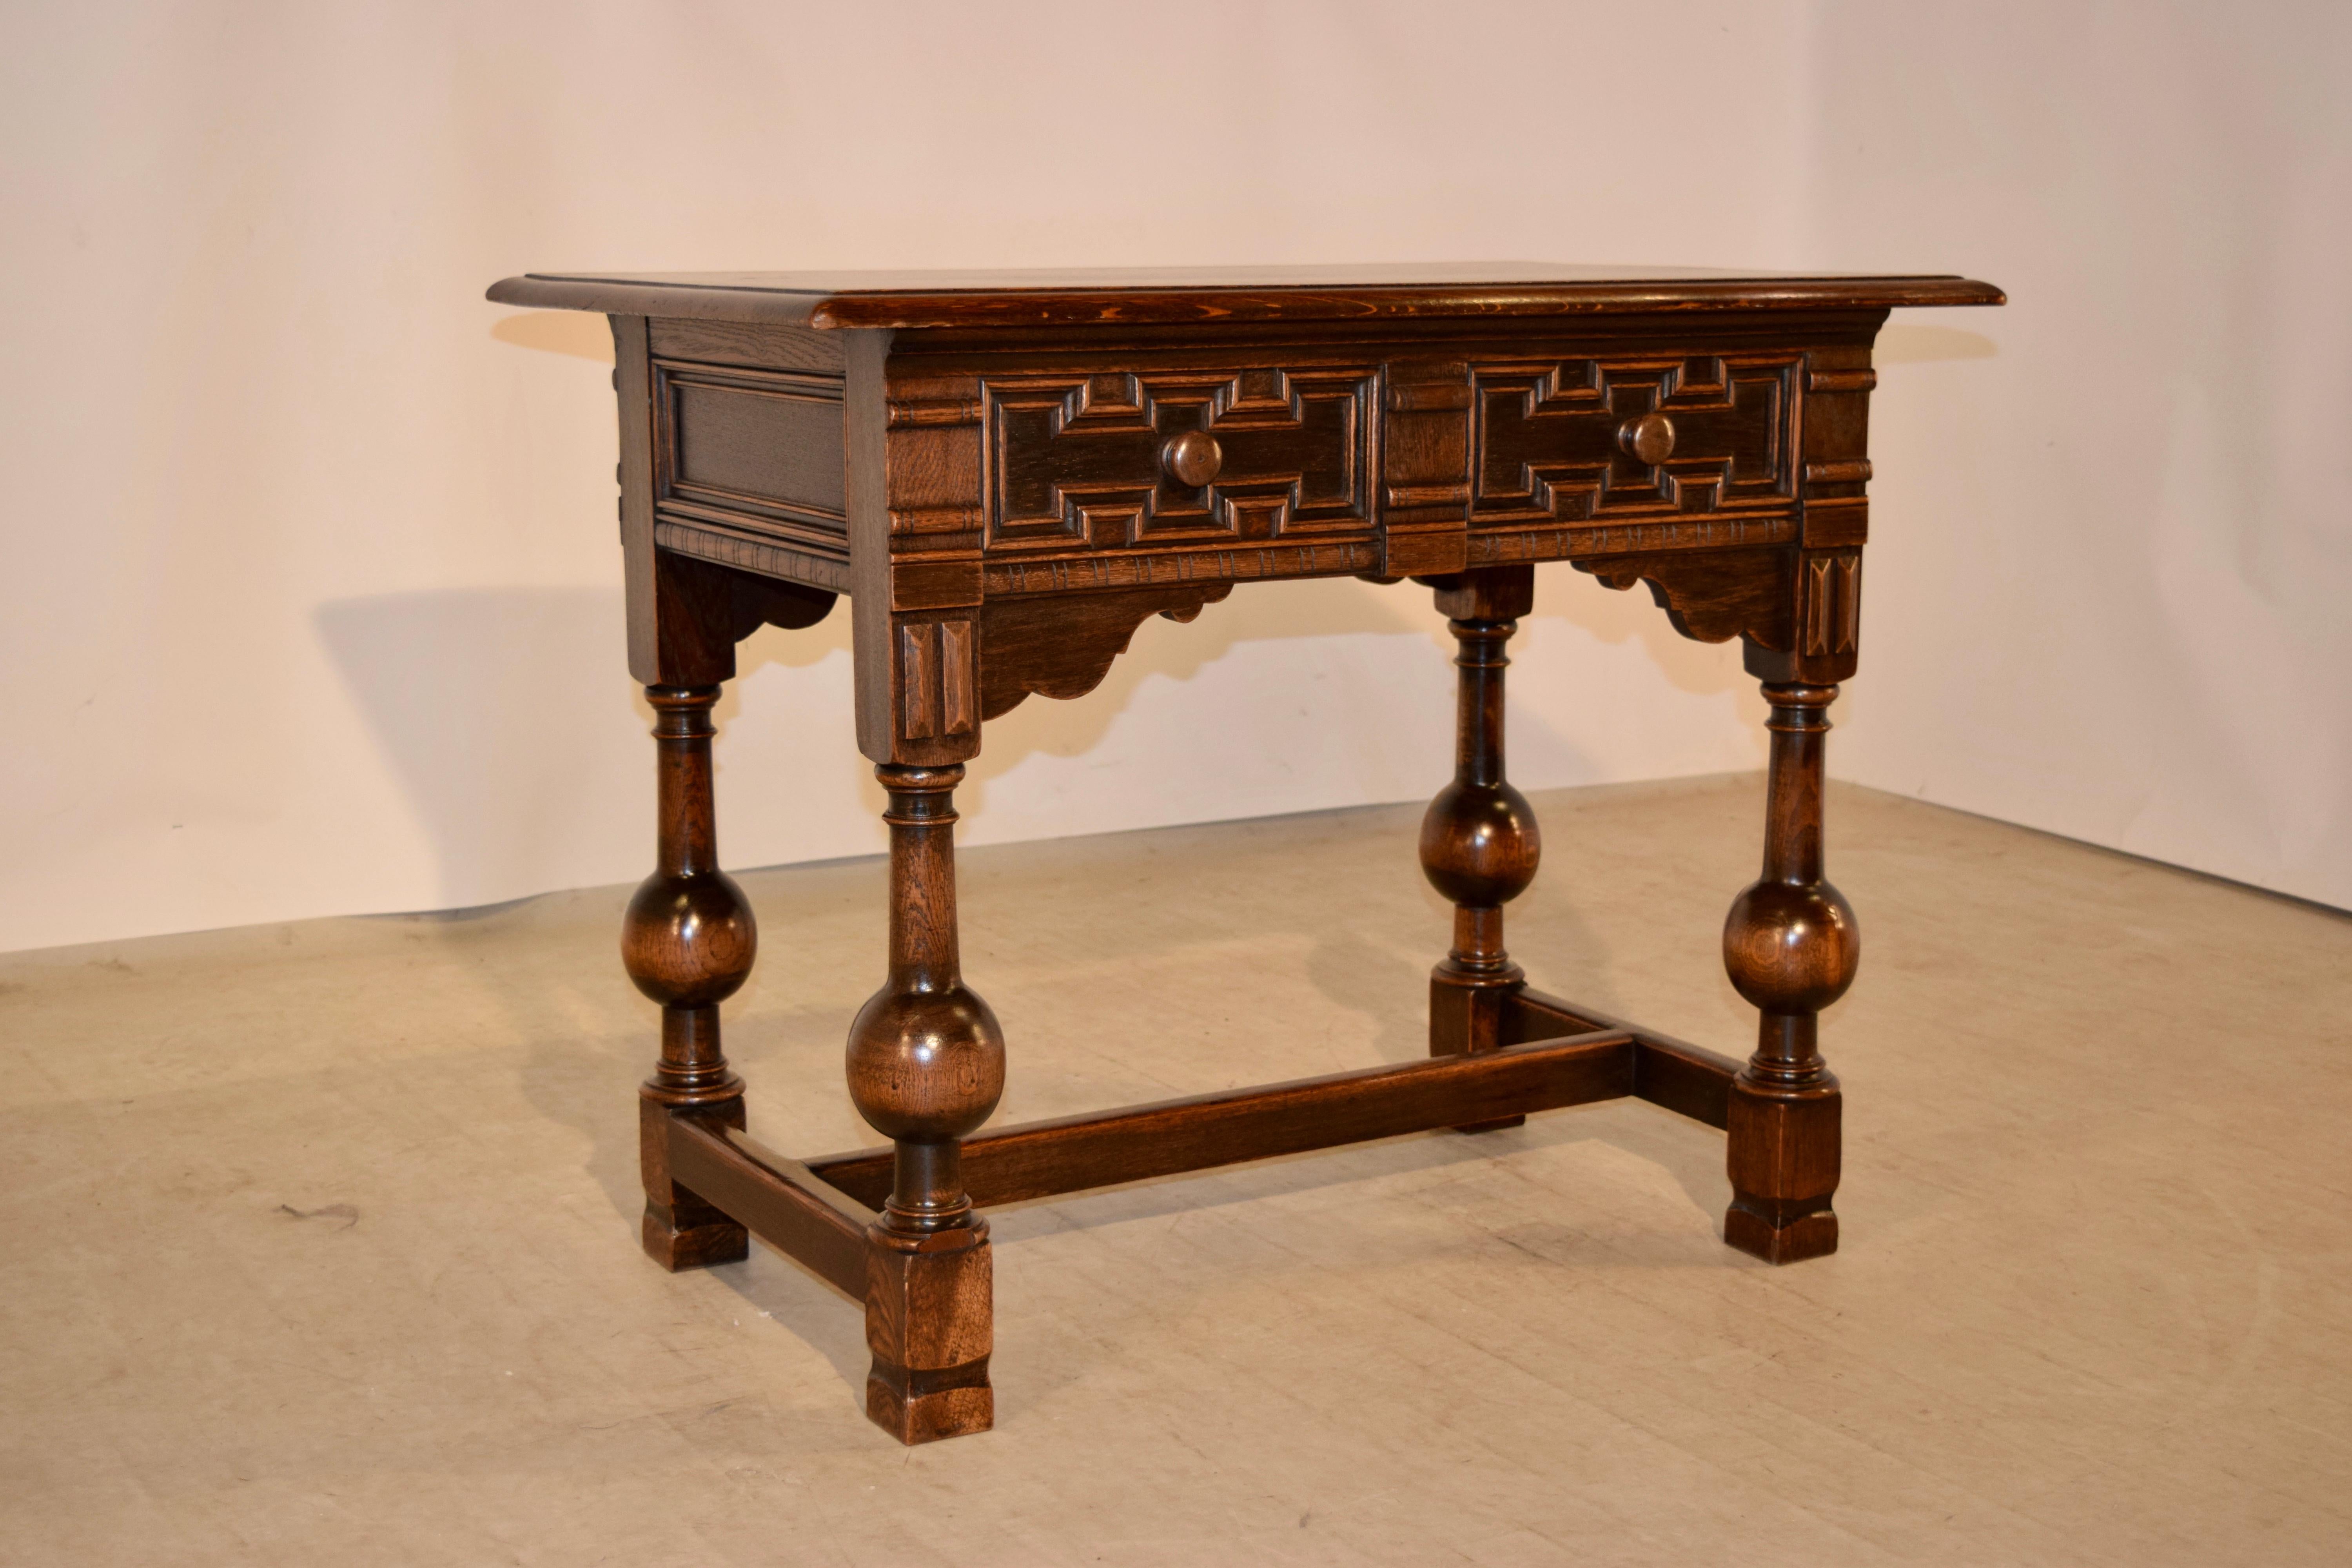 Late 19th century English oak library table with bevelled edge around the top. The piece has two drawers on one side and two matching false drawers on the other side for easy placement in any room. It is supported on wonderfully bulbous legs,